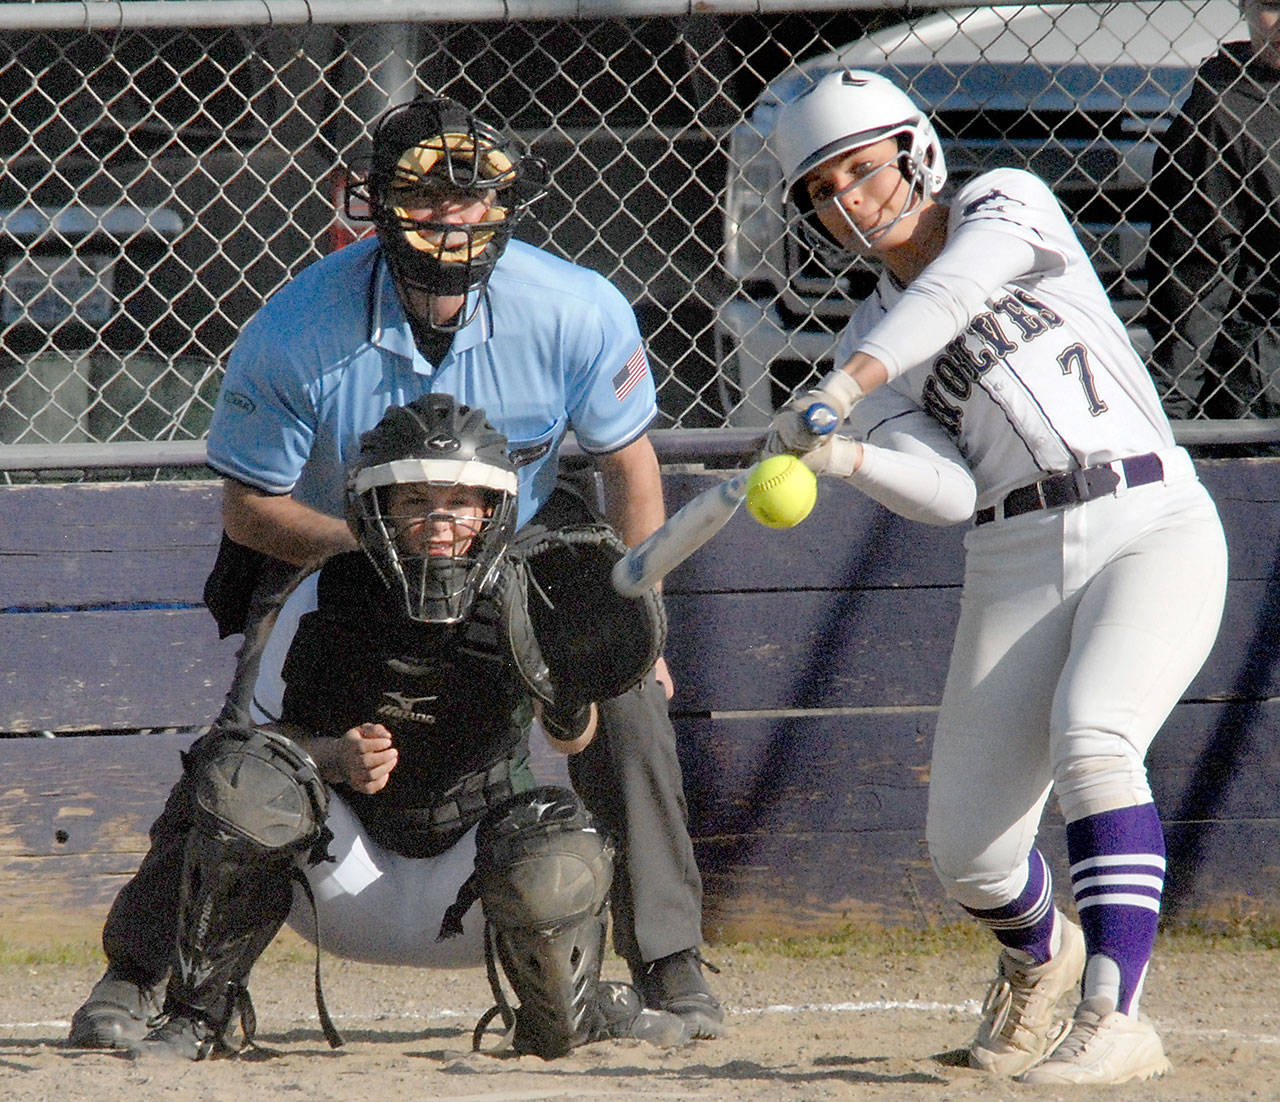 Keith Thorpe/Peninsula Daily News Sequim’s Isabelle Dennis, right, bats in the first inning as Port Angeles catcher Brennan Gray waits for the delivery on Wednesday at Sequim High School.